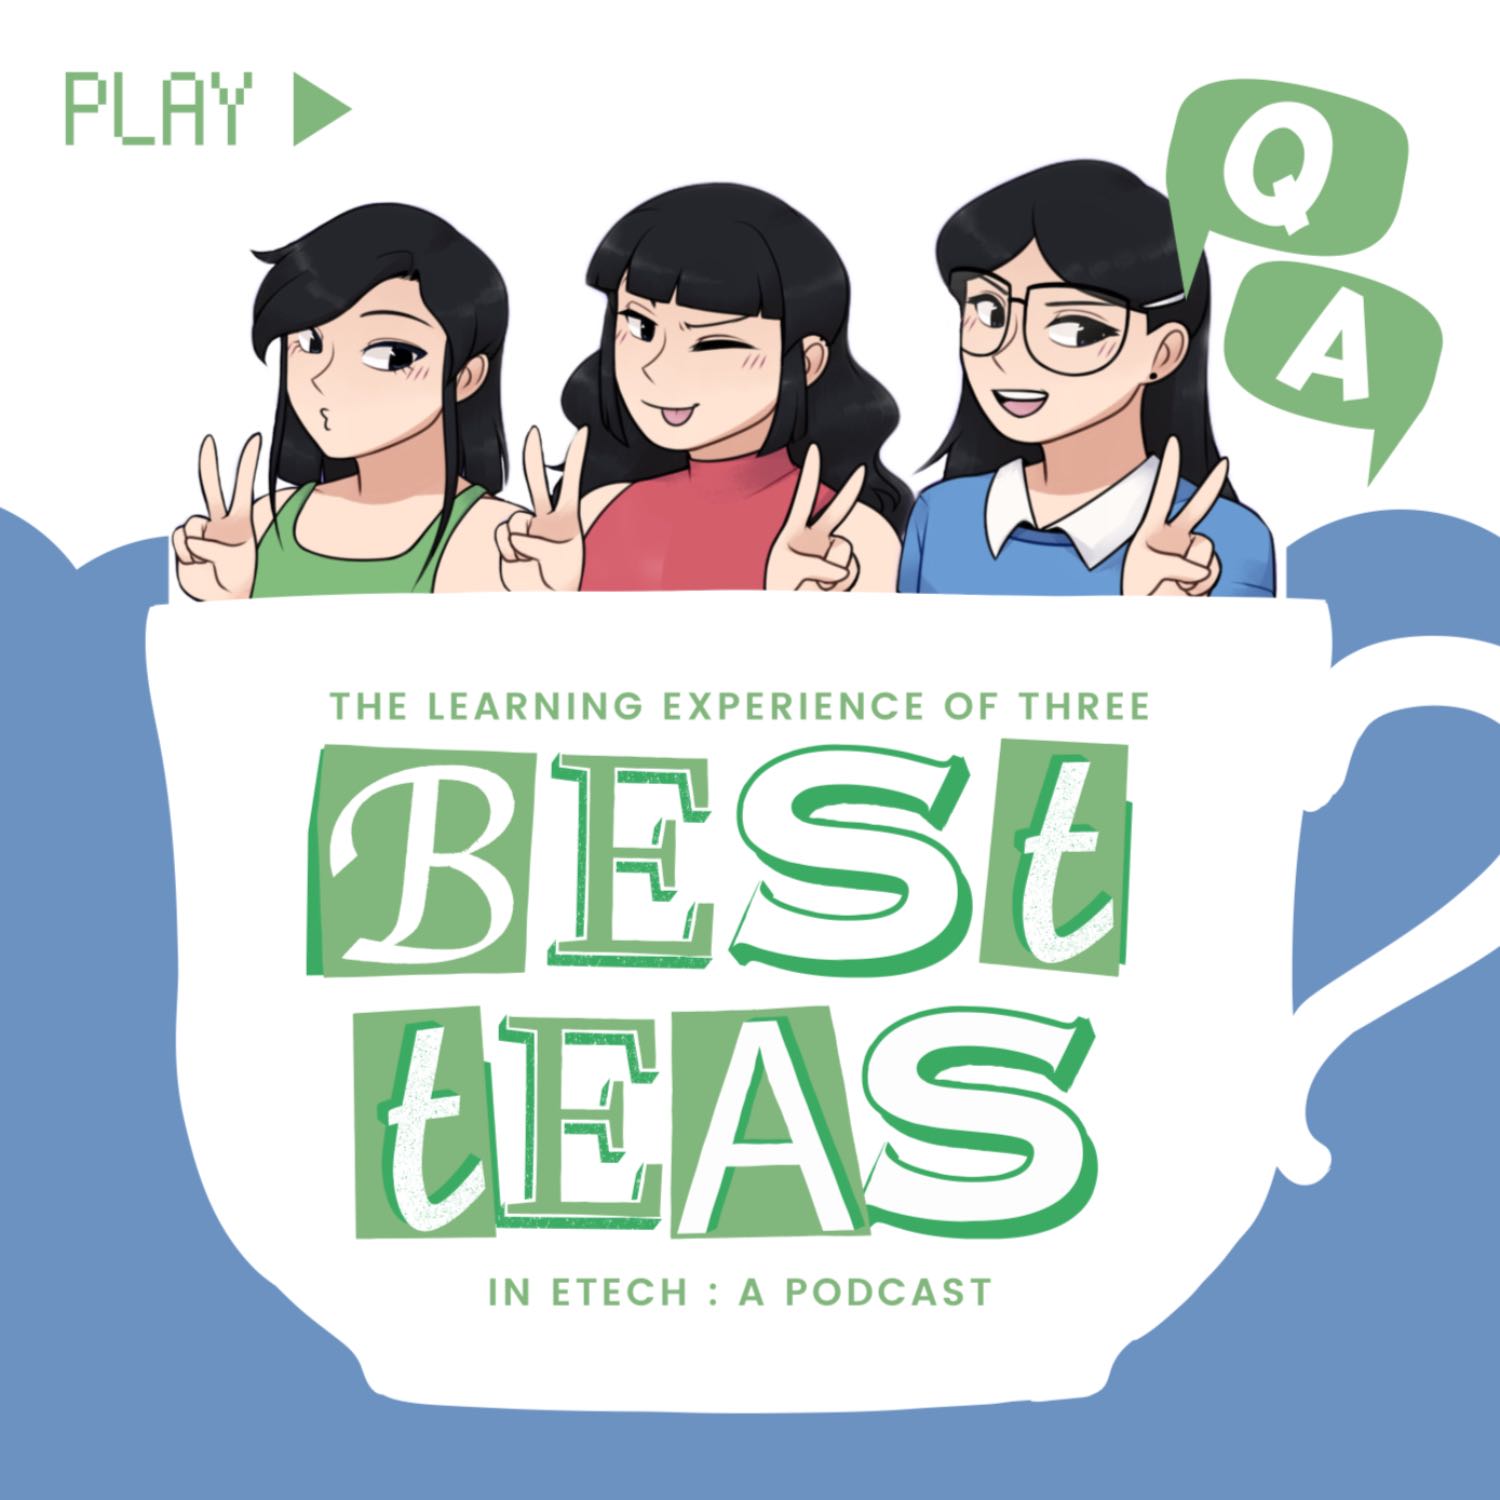 Best Teas of Three in a Podcast : Learning Experience in Etech